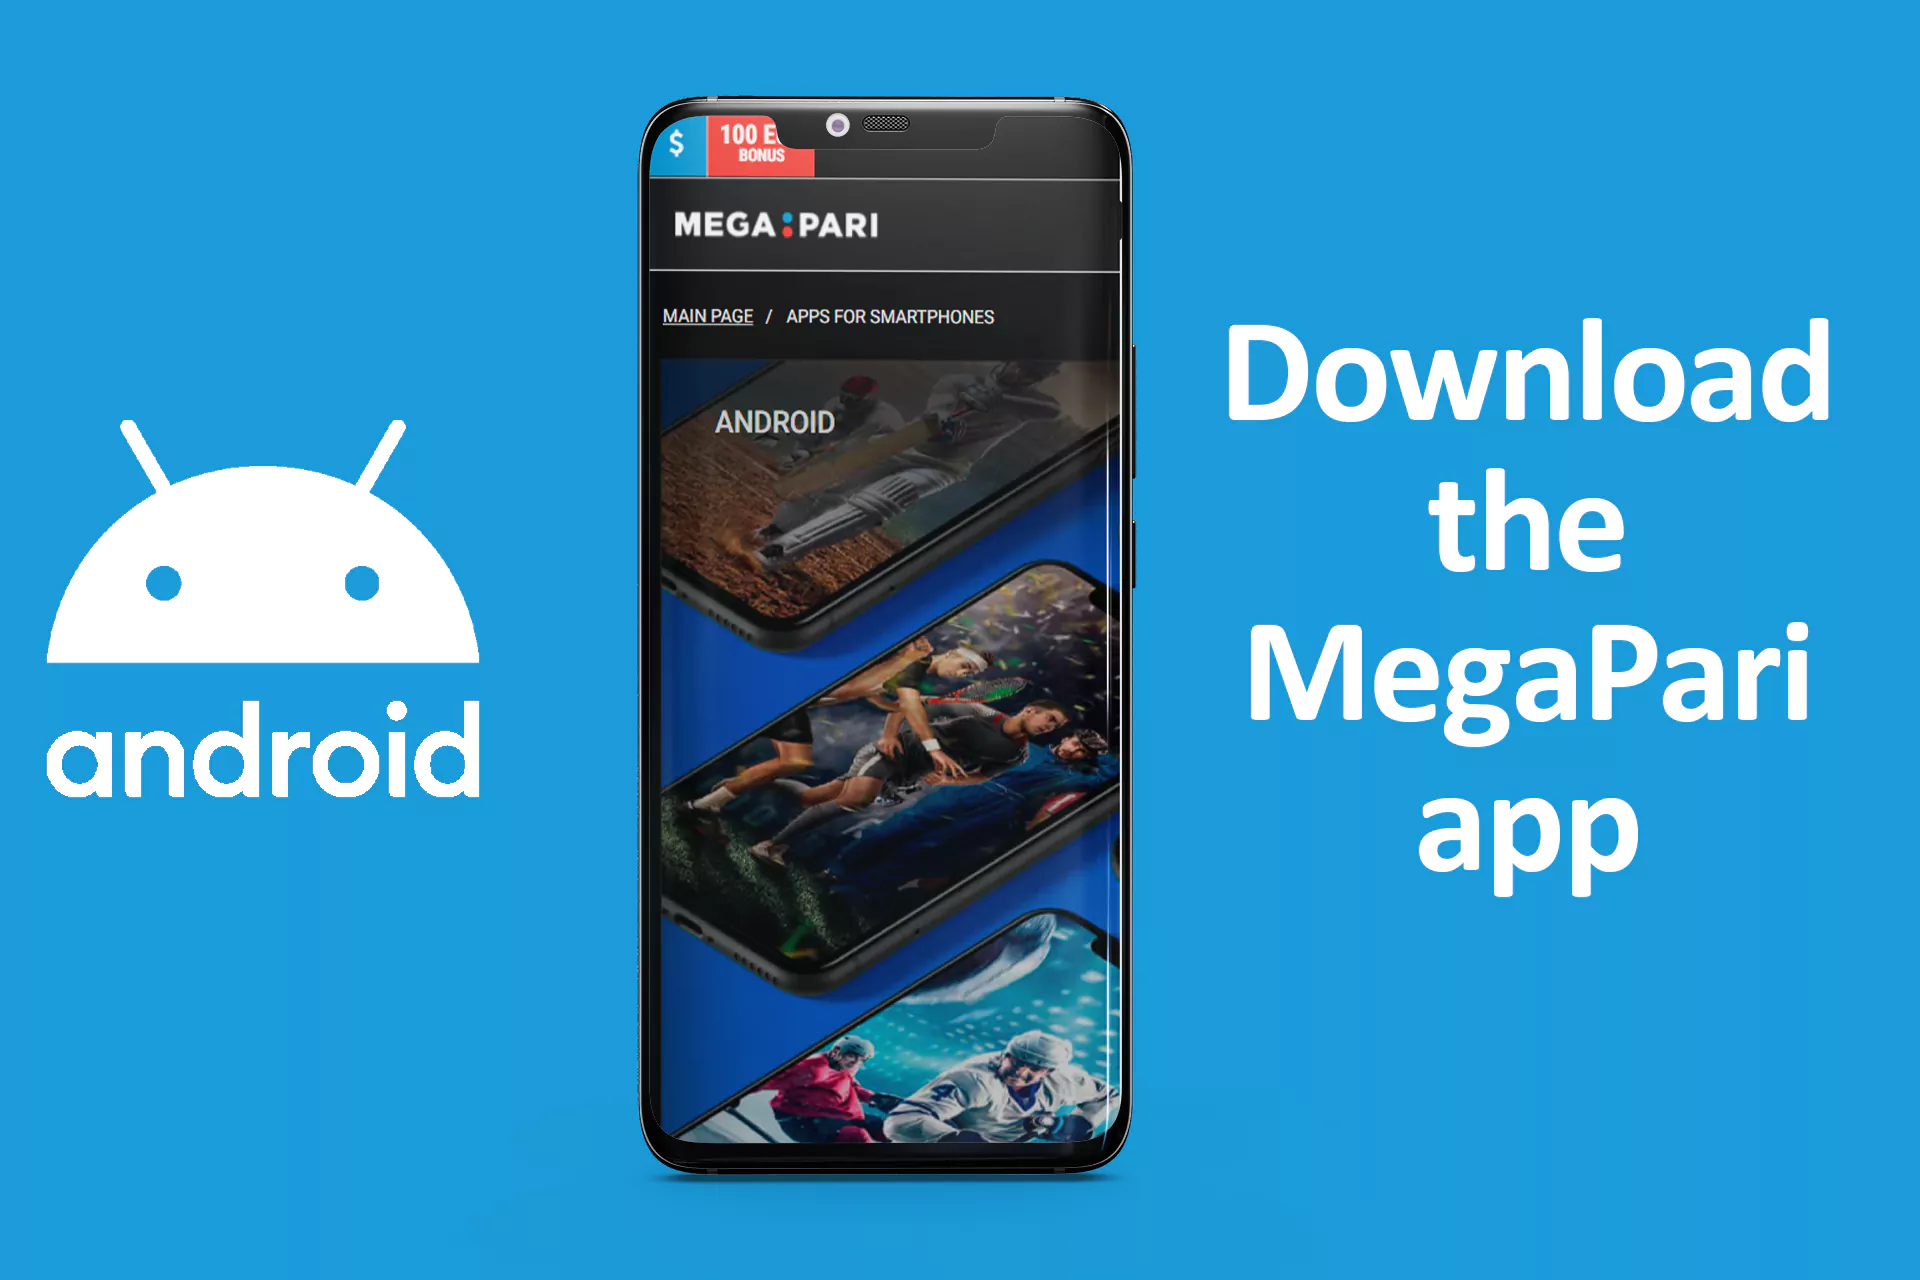 Downoad the Mega Pari app on your Android mobile.